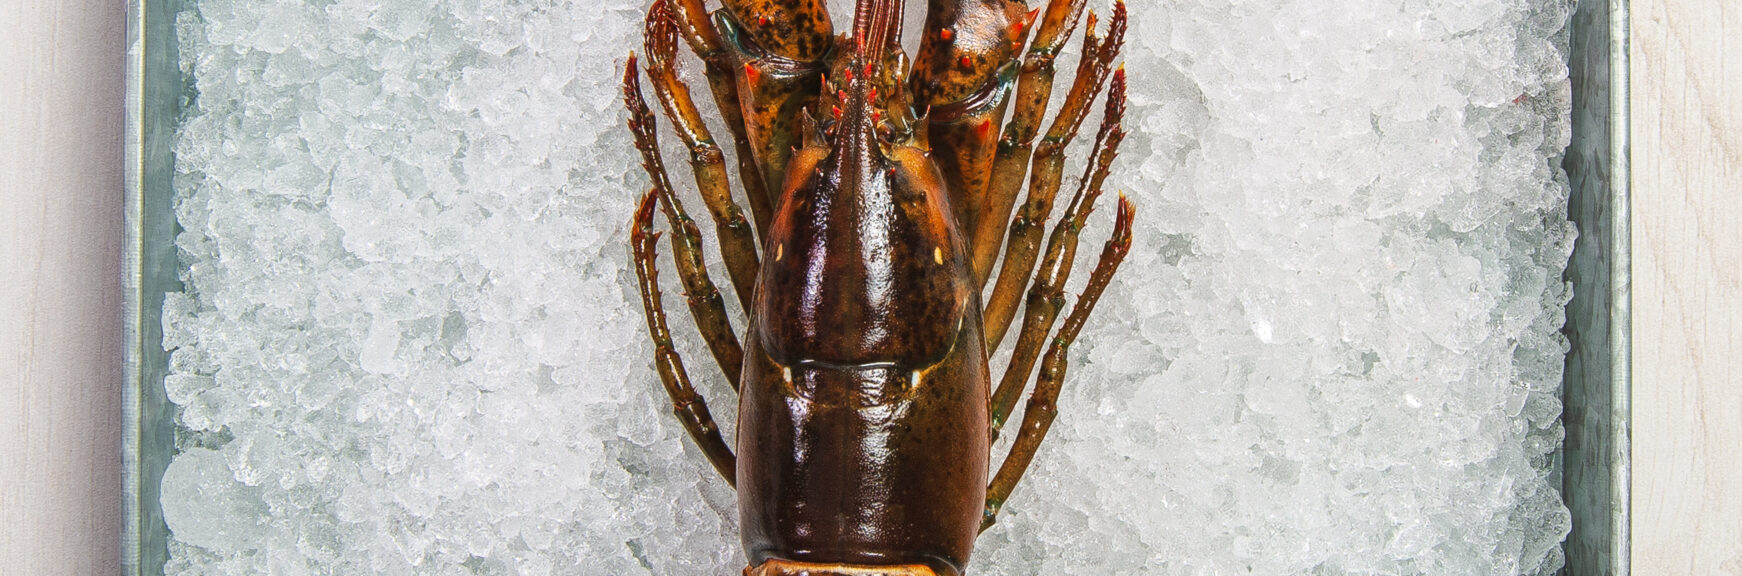 How to Boil Lobster recipe image